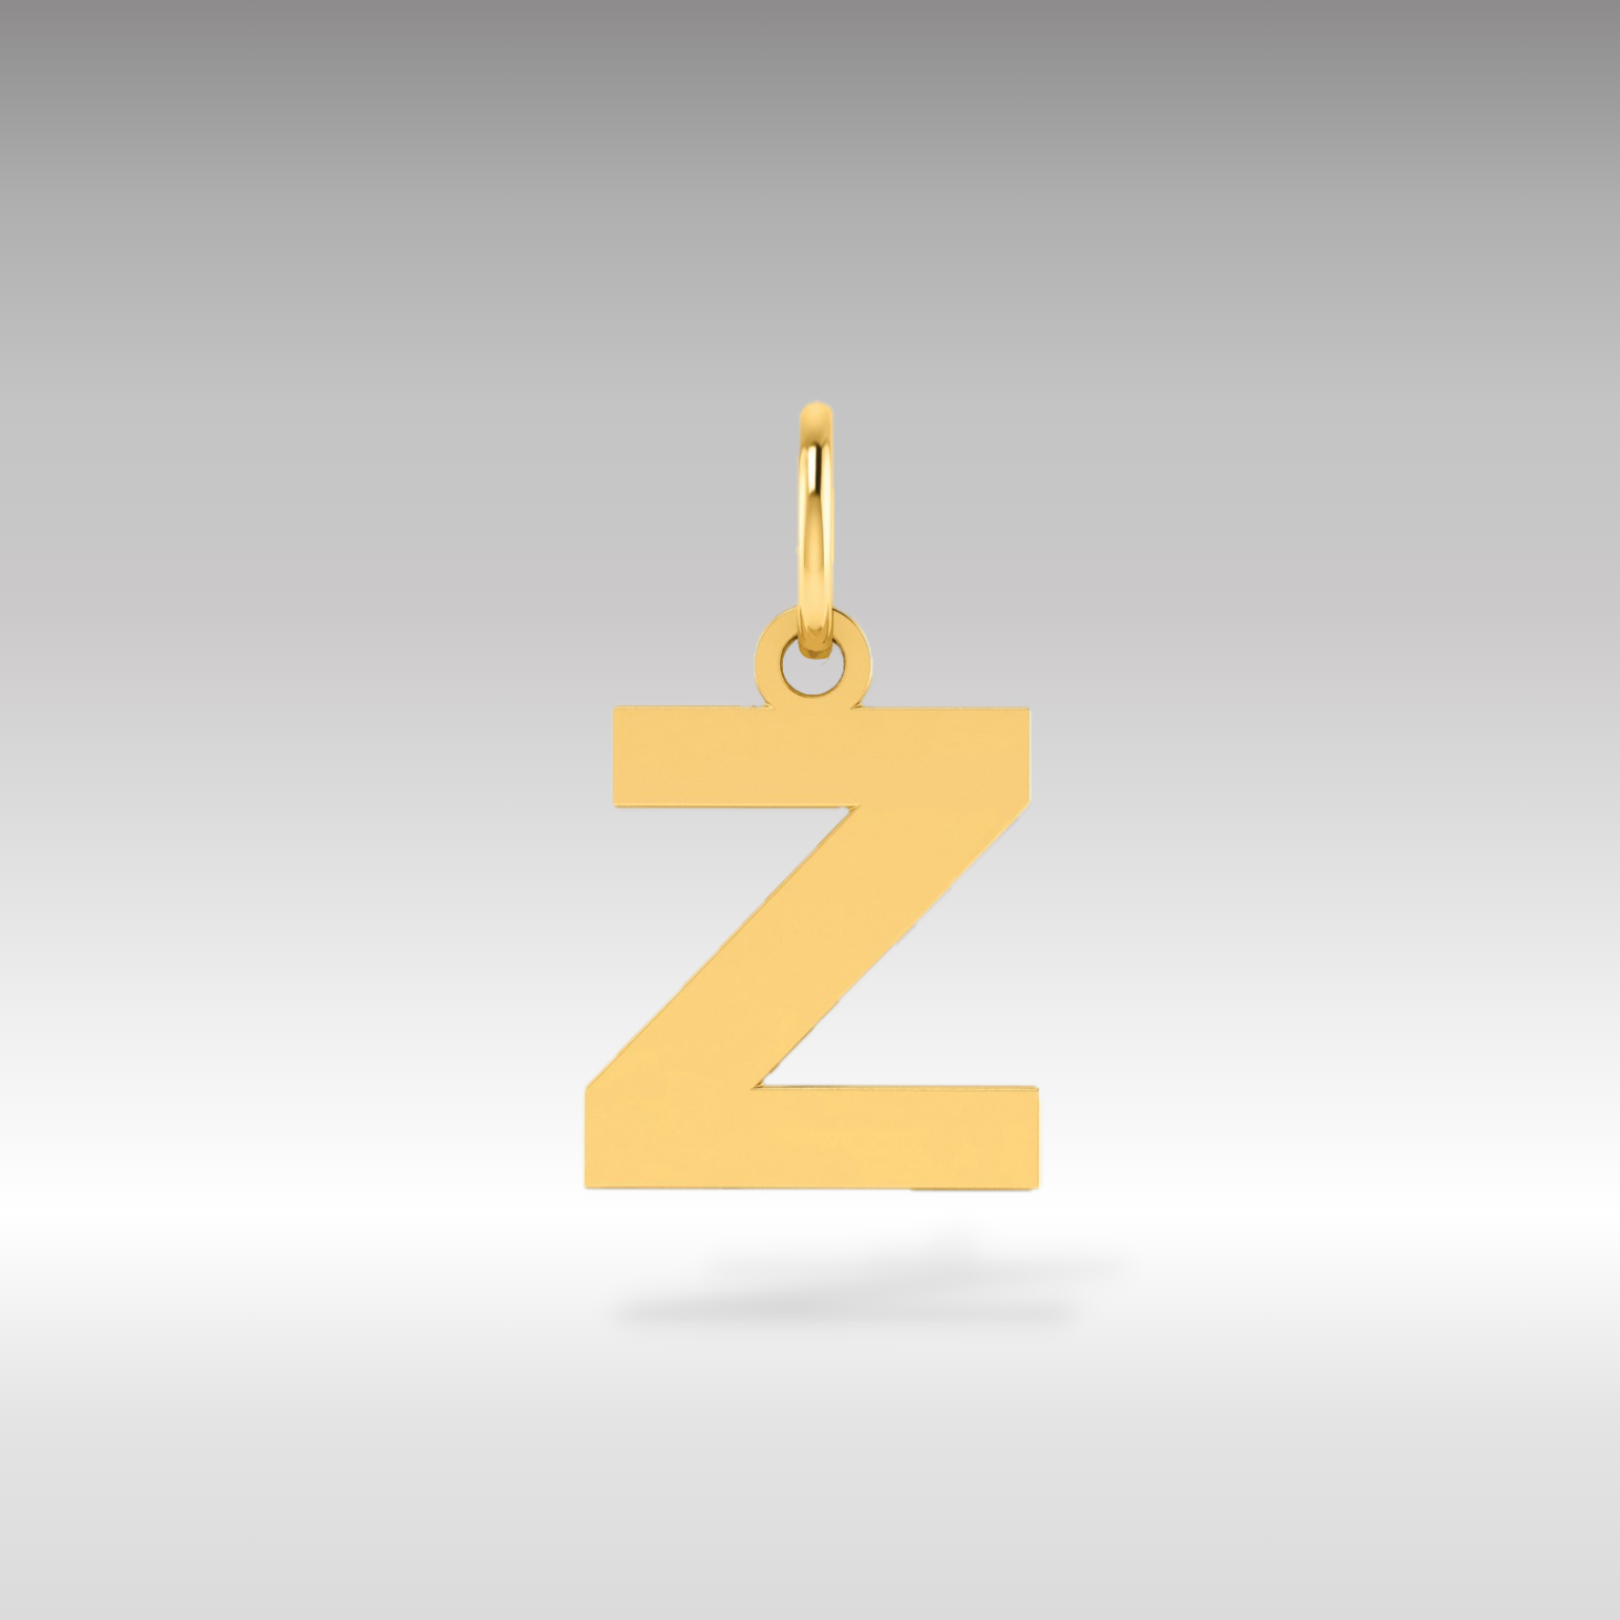 14K Gold Block Letter "Z" Initial Pendant - Charlie & Co. Jewelry